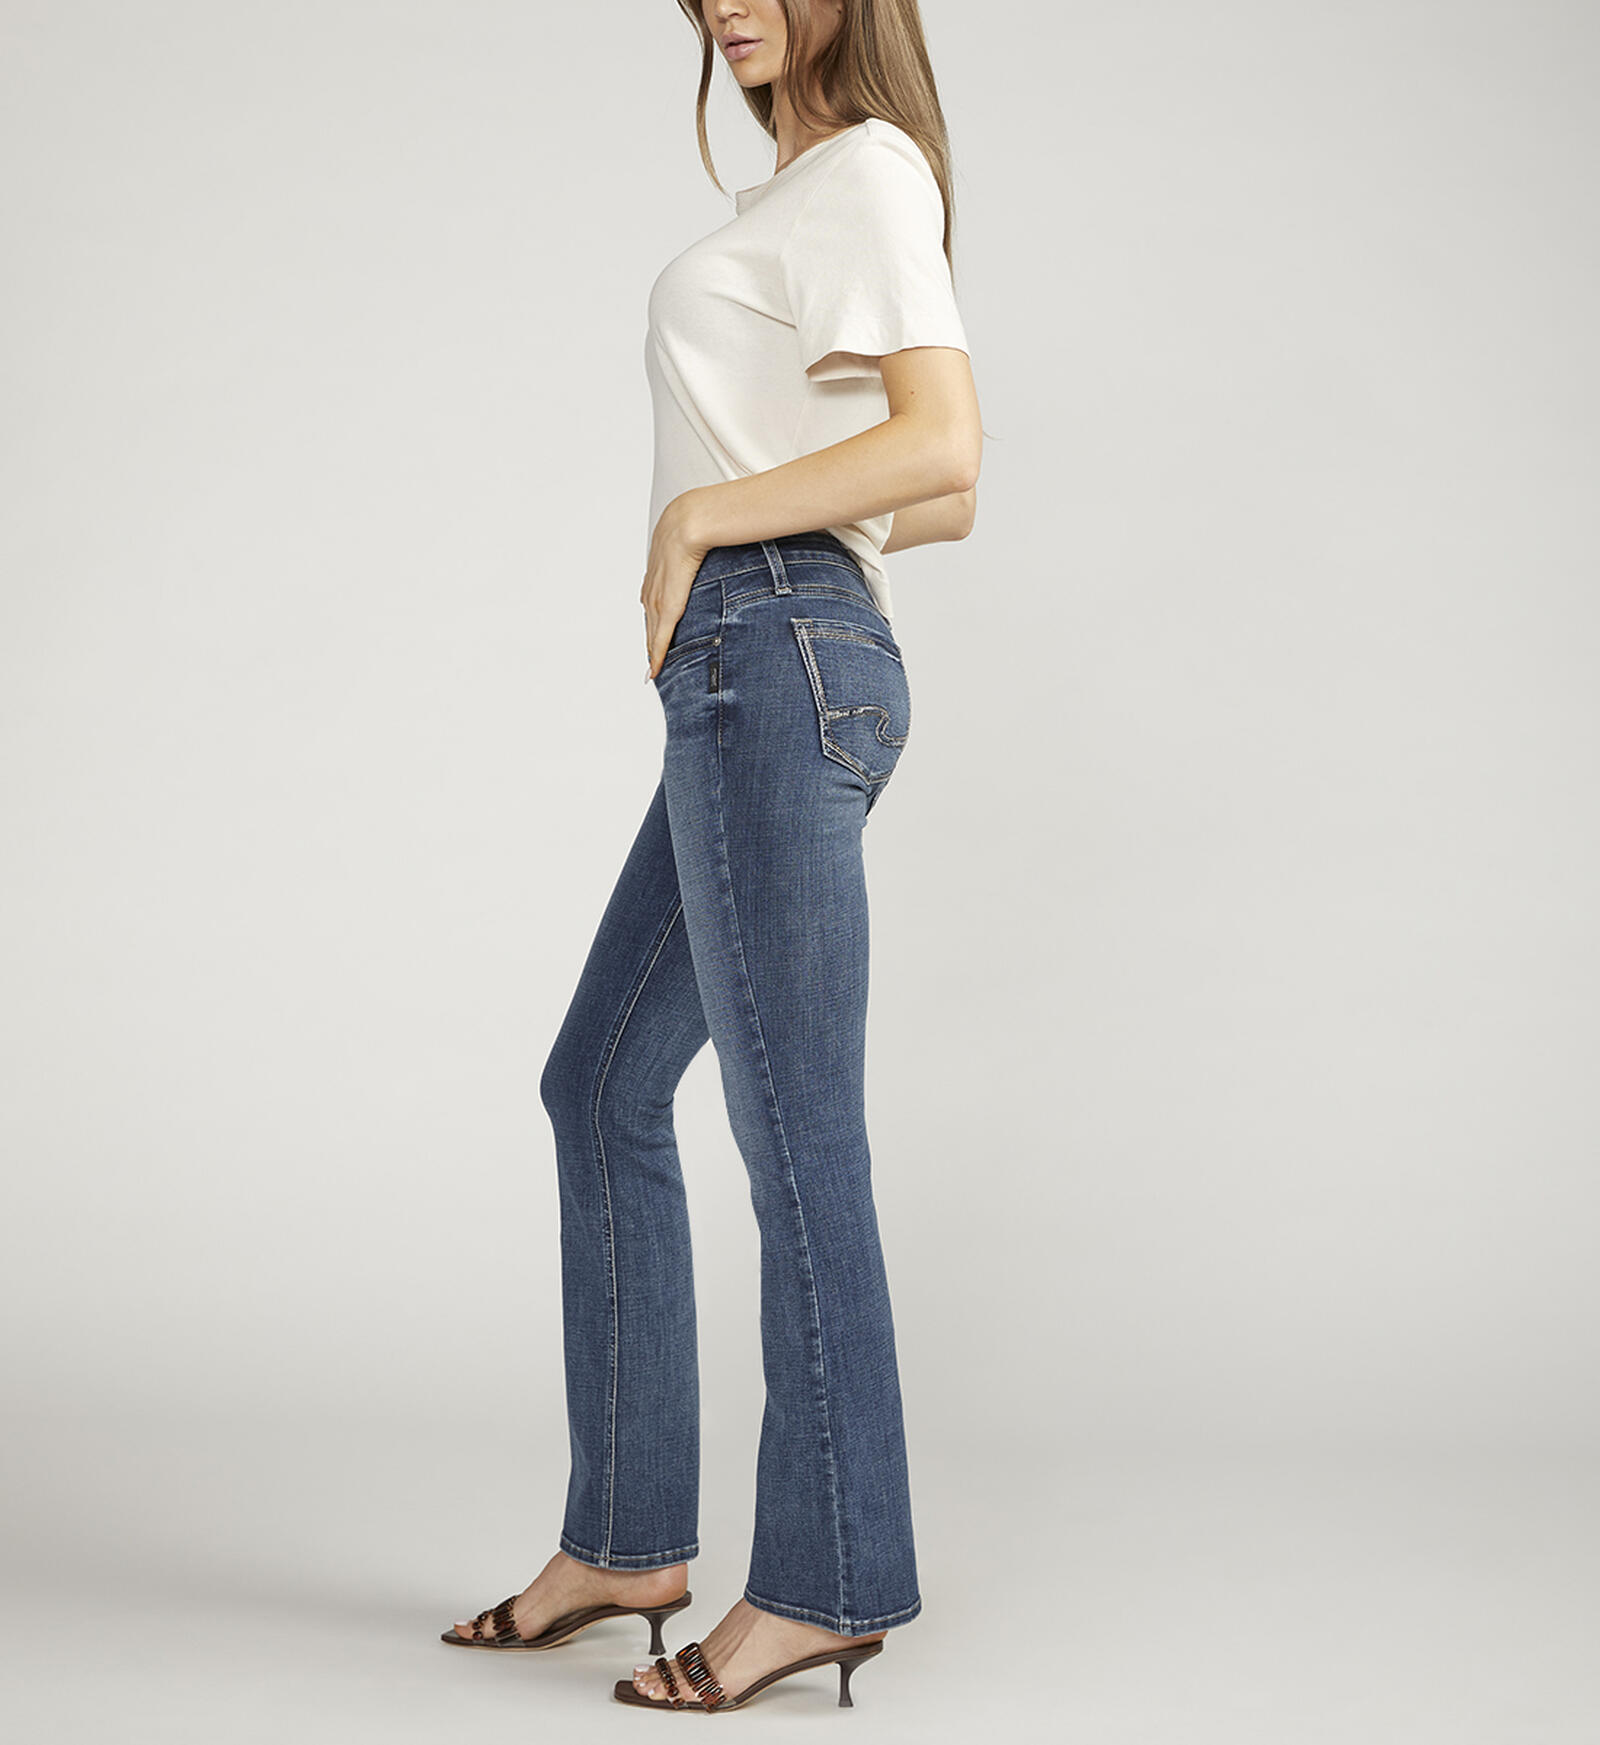 Buy Tuesday Low Rise Slim Bootcut Jeans for USD 98.00